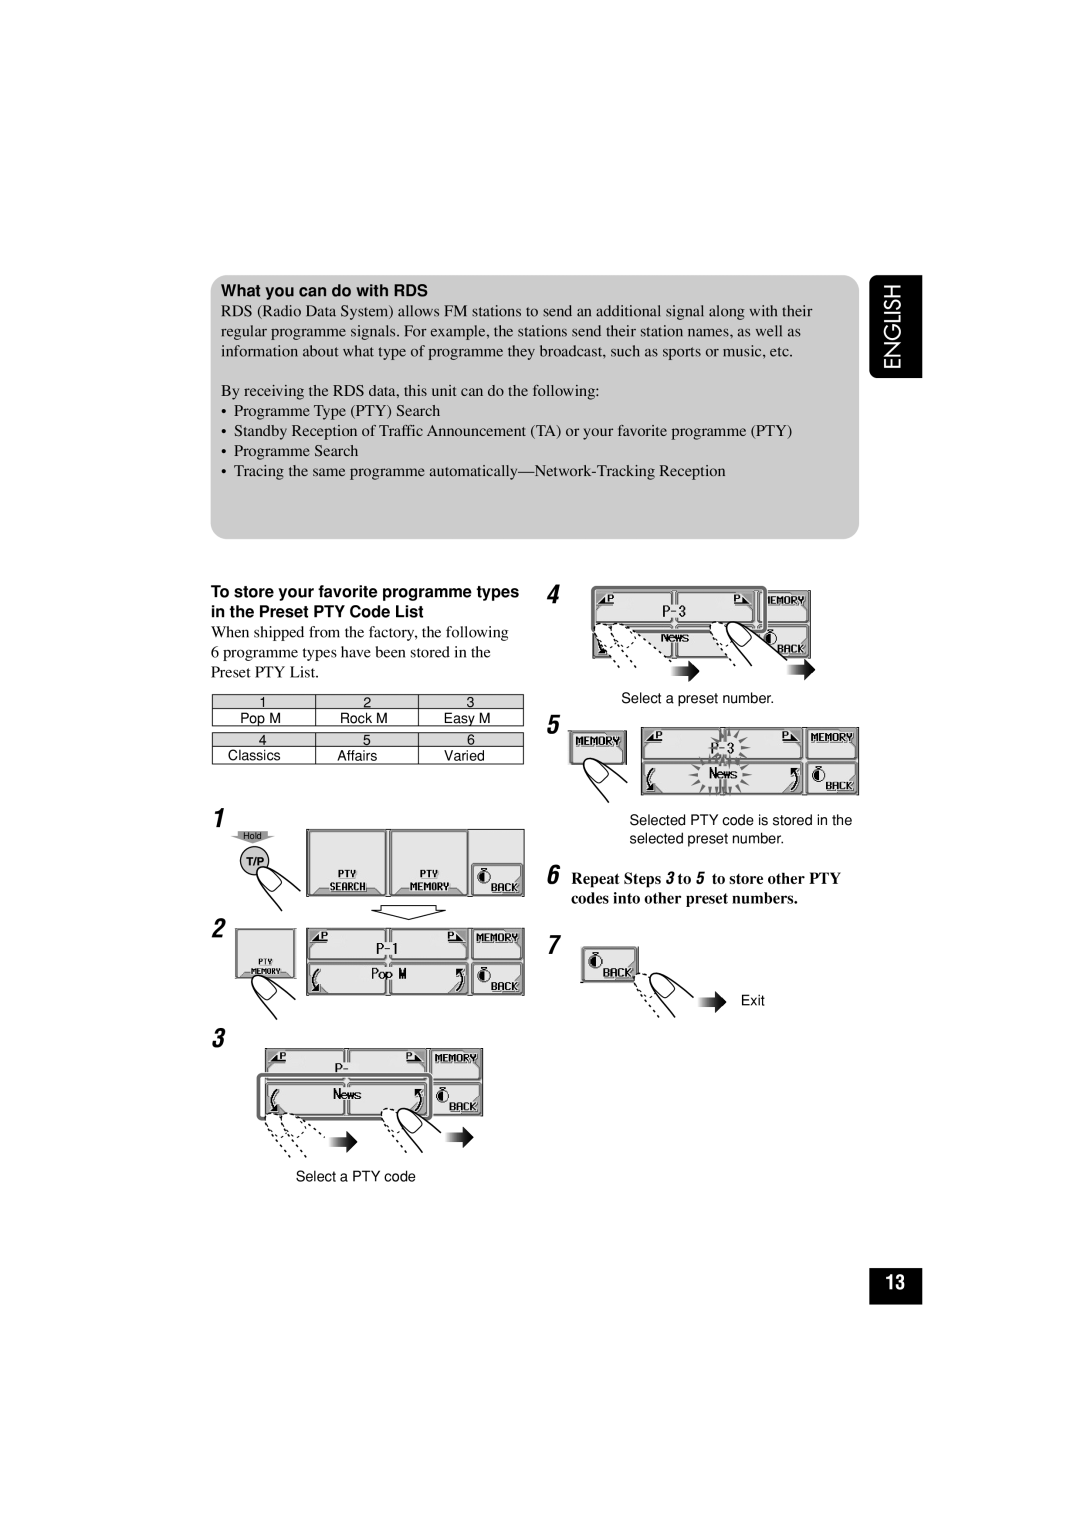 JVC KD-LHX501, KD-LHX502 manual English, What you can do with RDS 